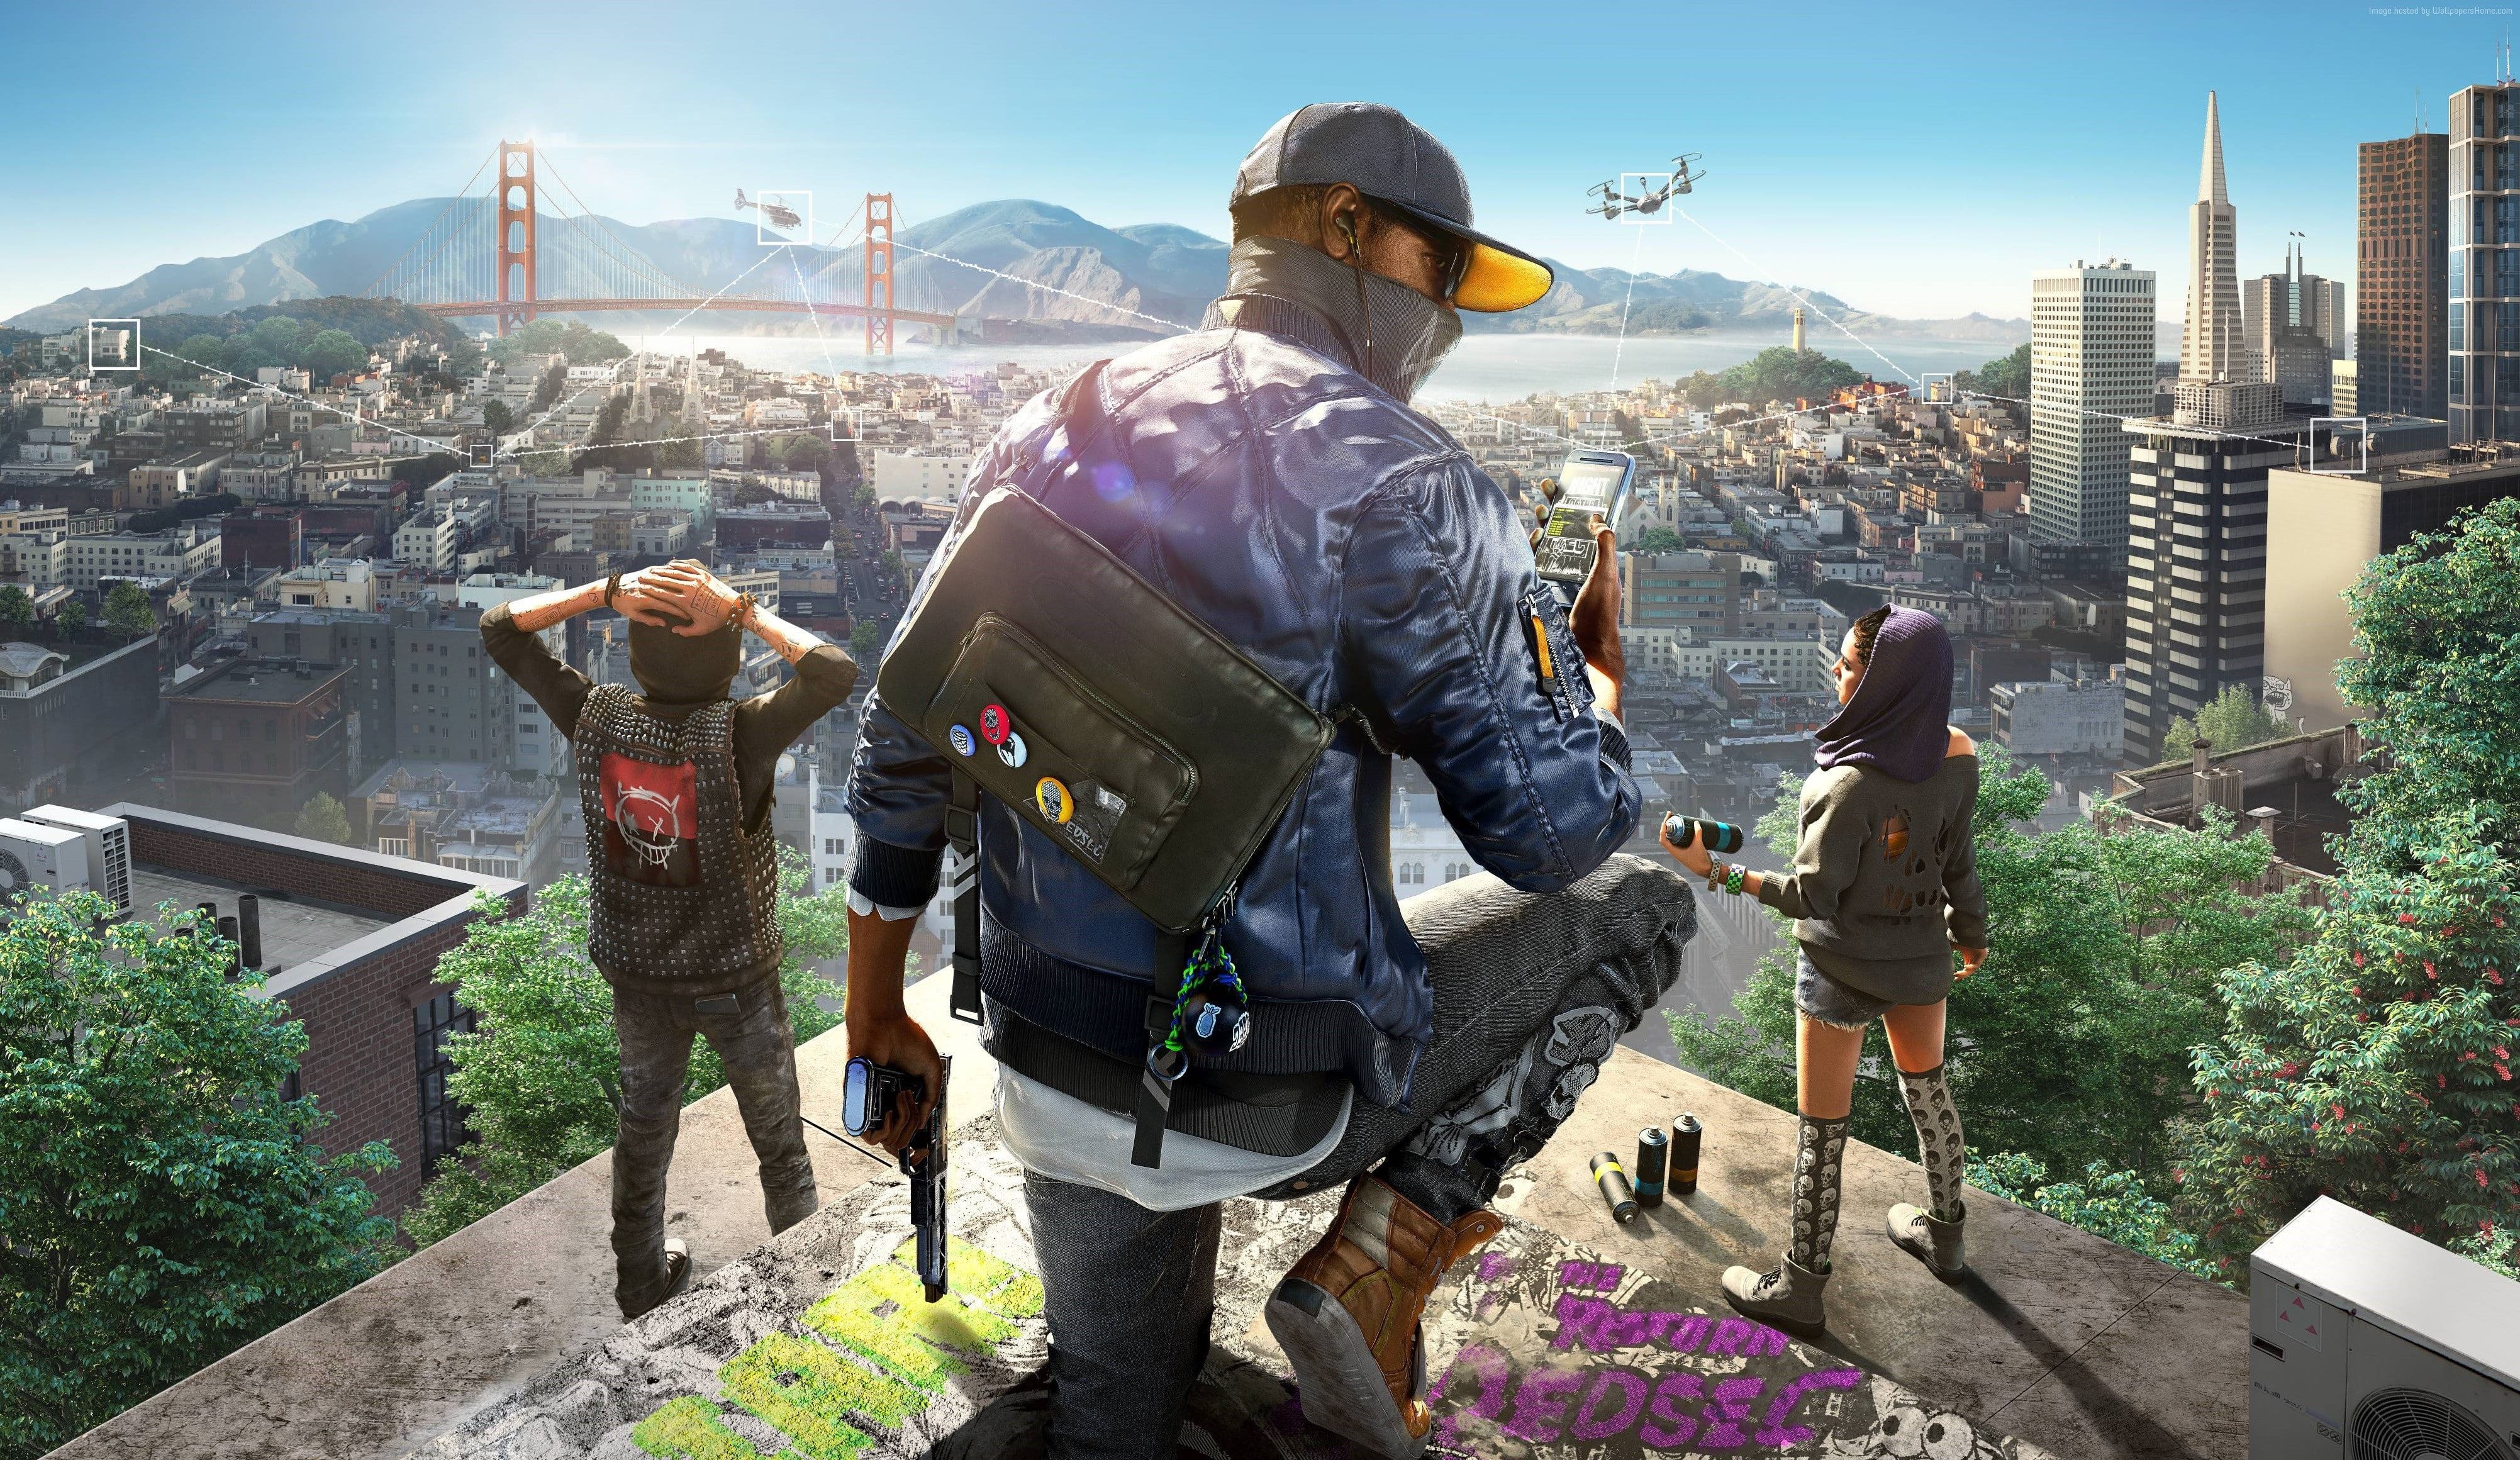 Xbox 360 PlayStation 3 Xbox One #PC PlayStation 4 Watch Dogs 2 K # wallpaper #hdwallpaper. Android wallpaper anime, 4k wallpaper for mobile, HD anime wallpaper